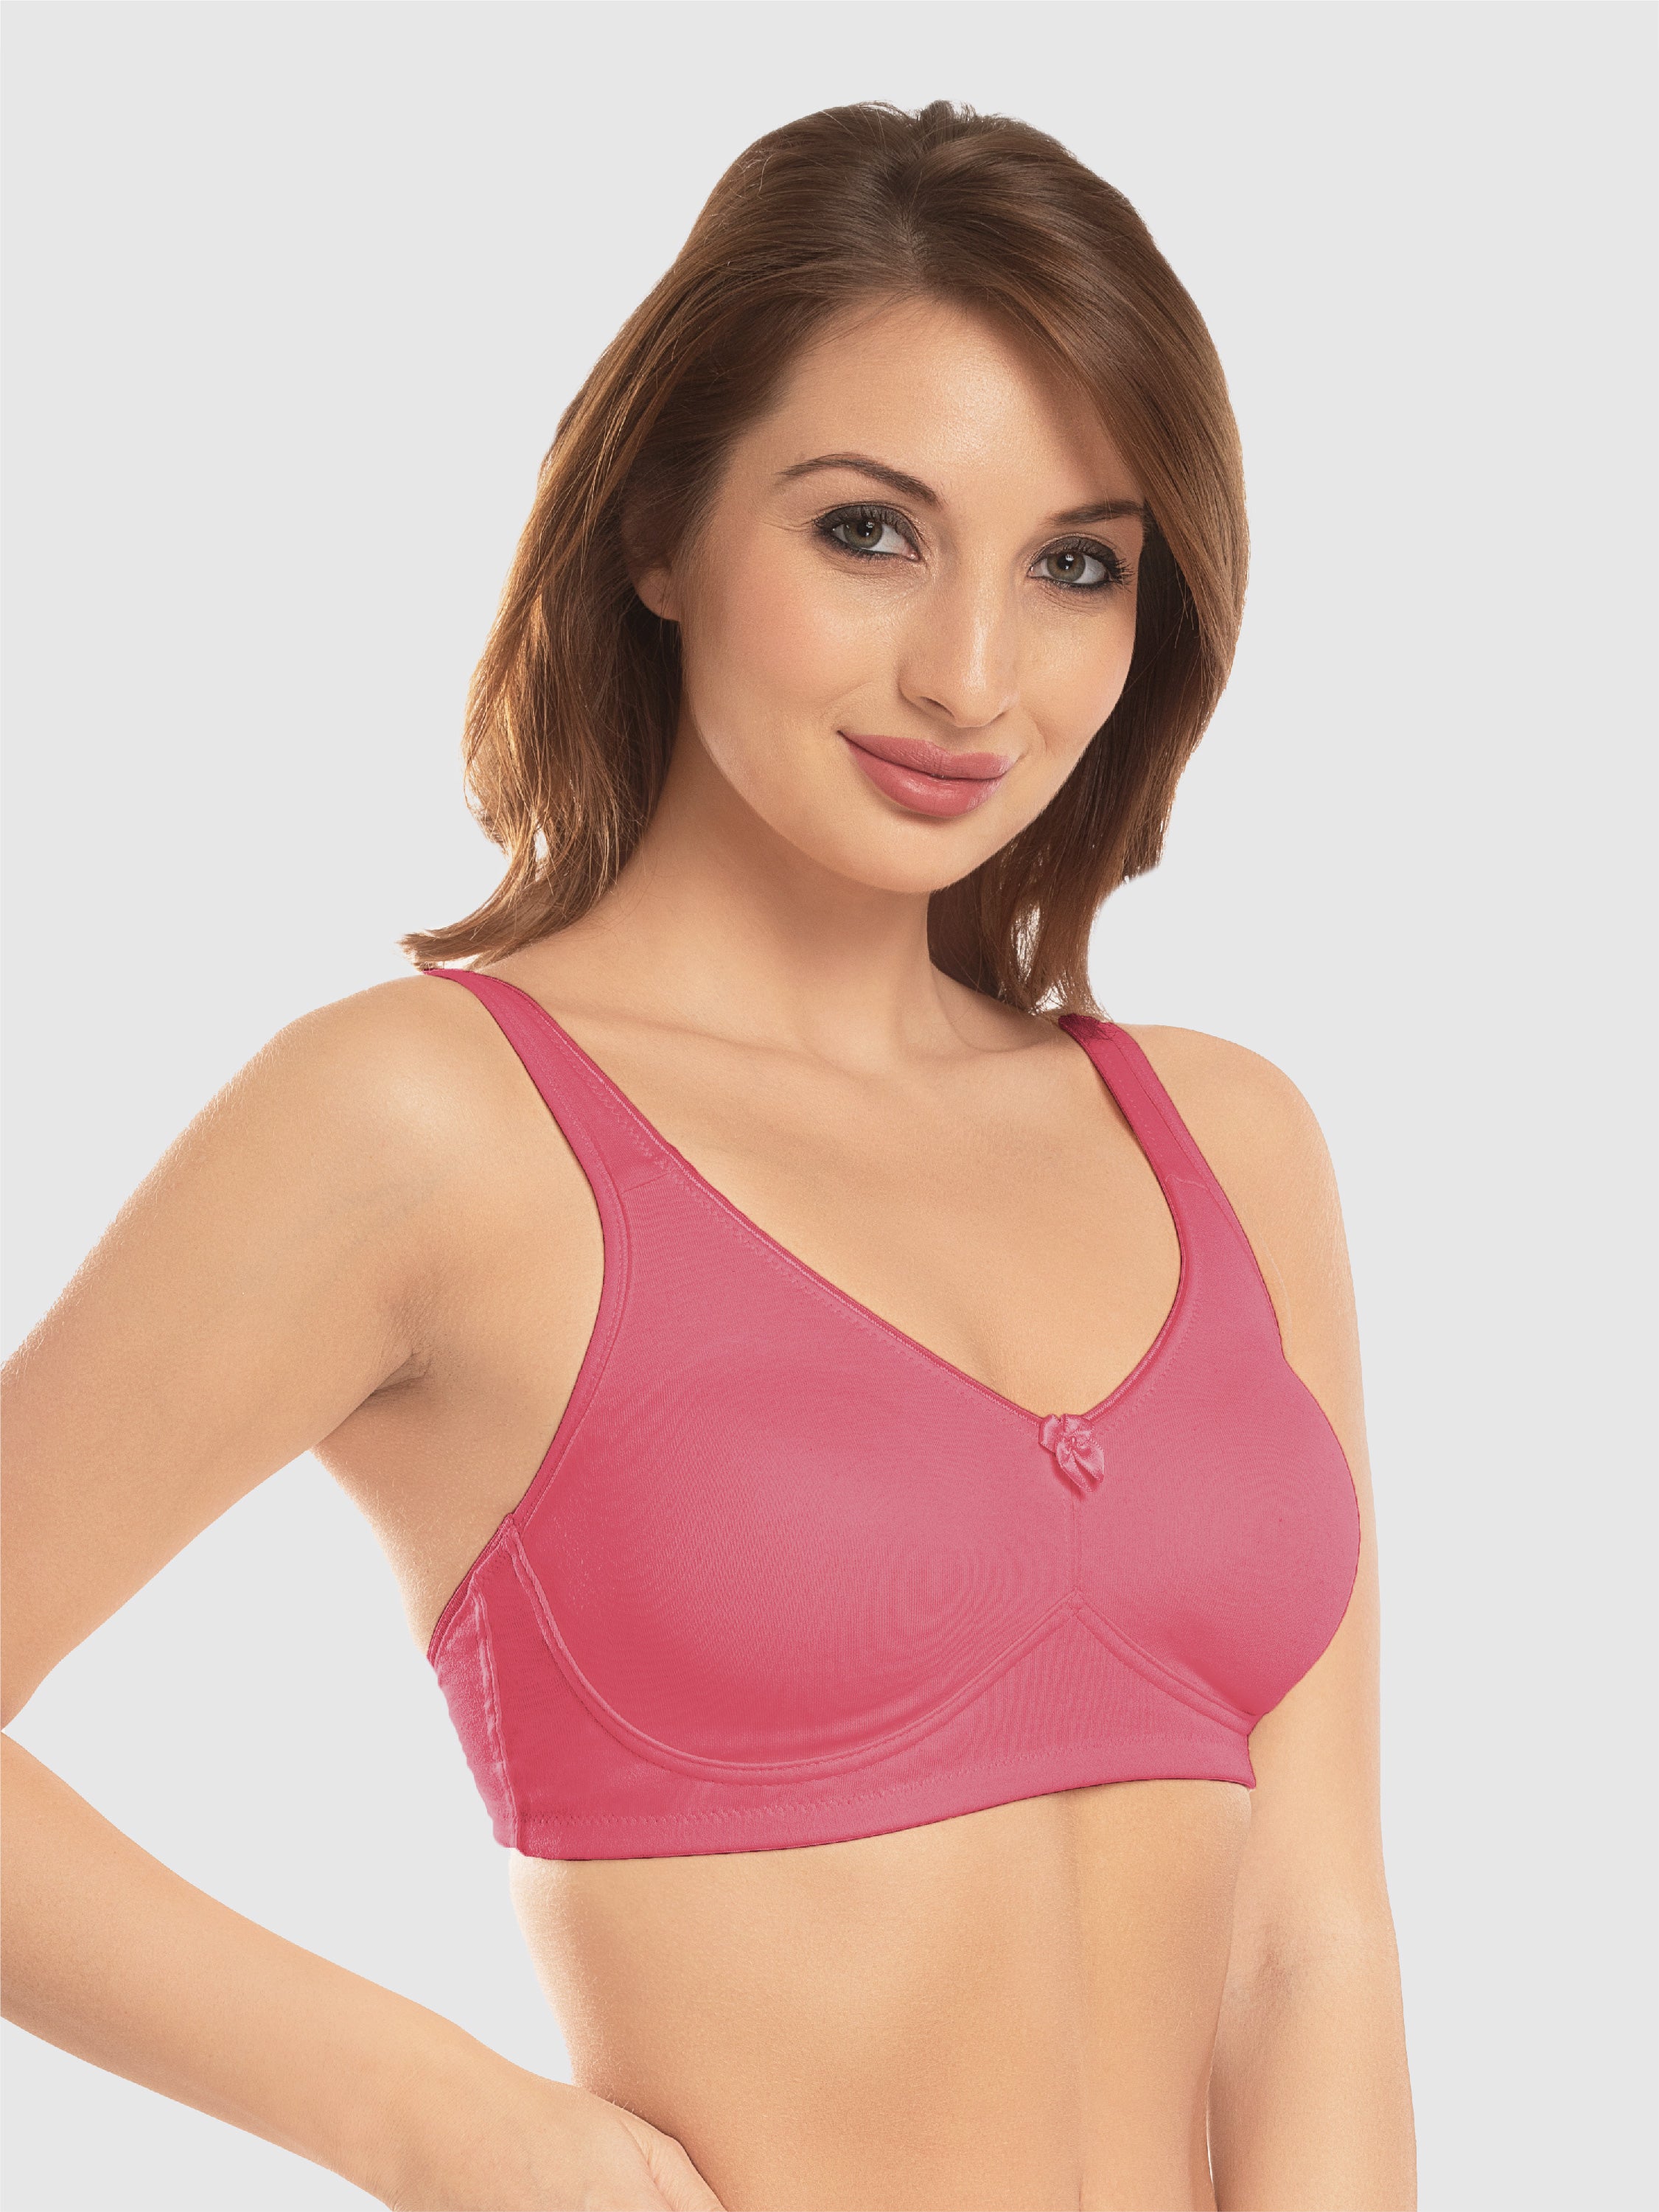 Daisy Dee Dusty Rose Non Padded Non-Wired Full Coverage T-Shirt Bra - NDLGHT-Dusty Rose